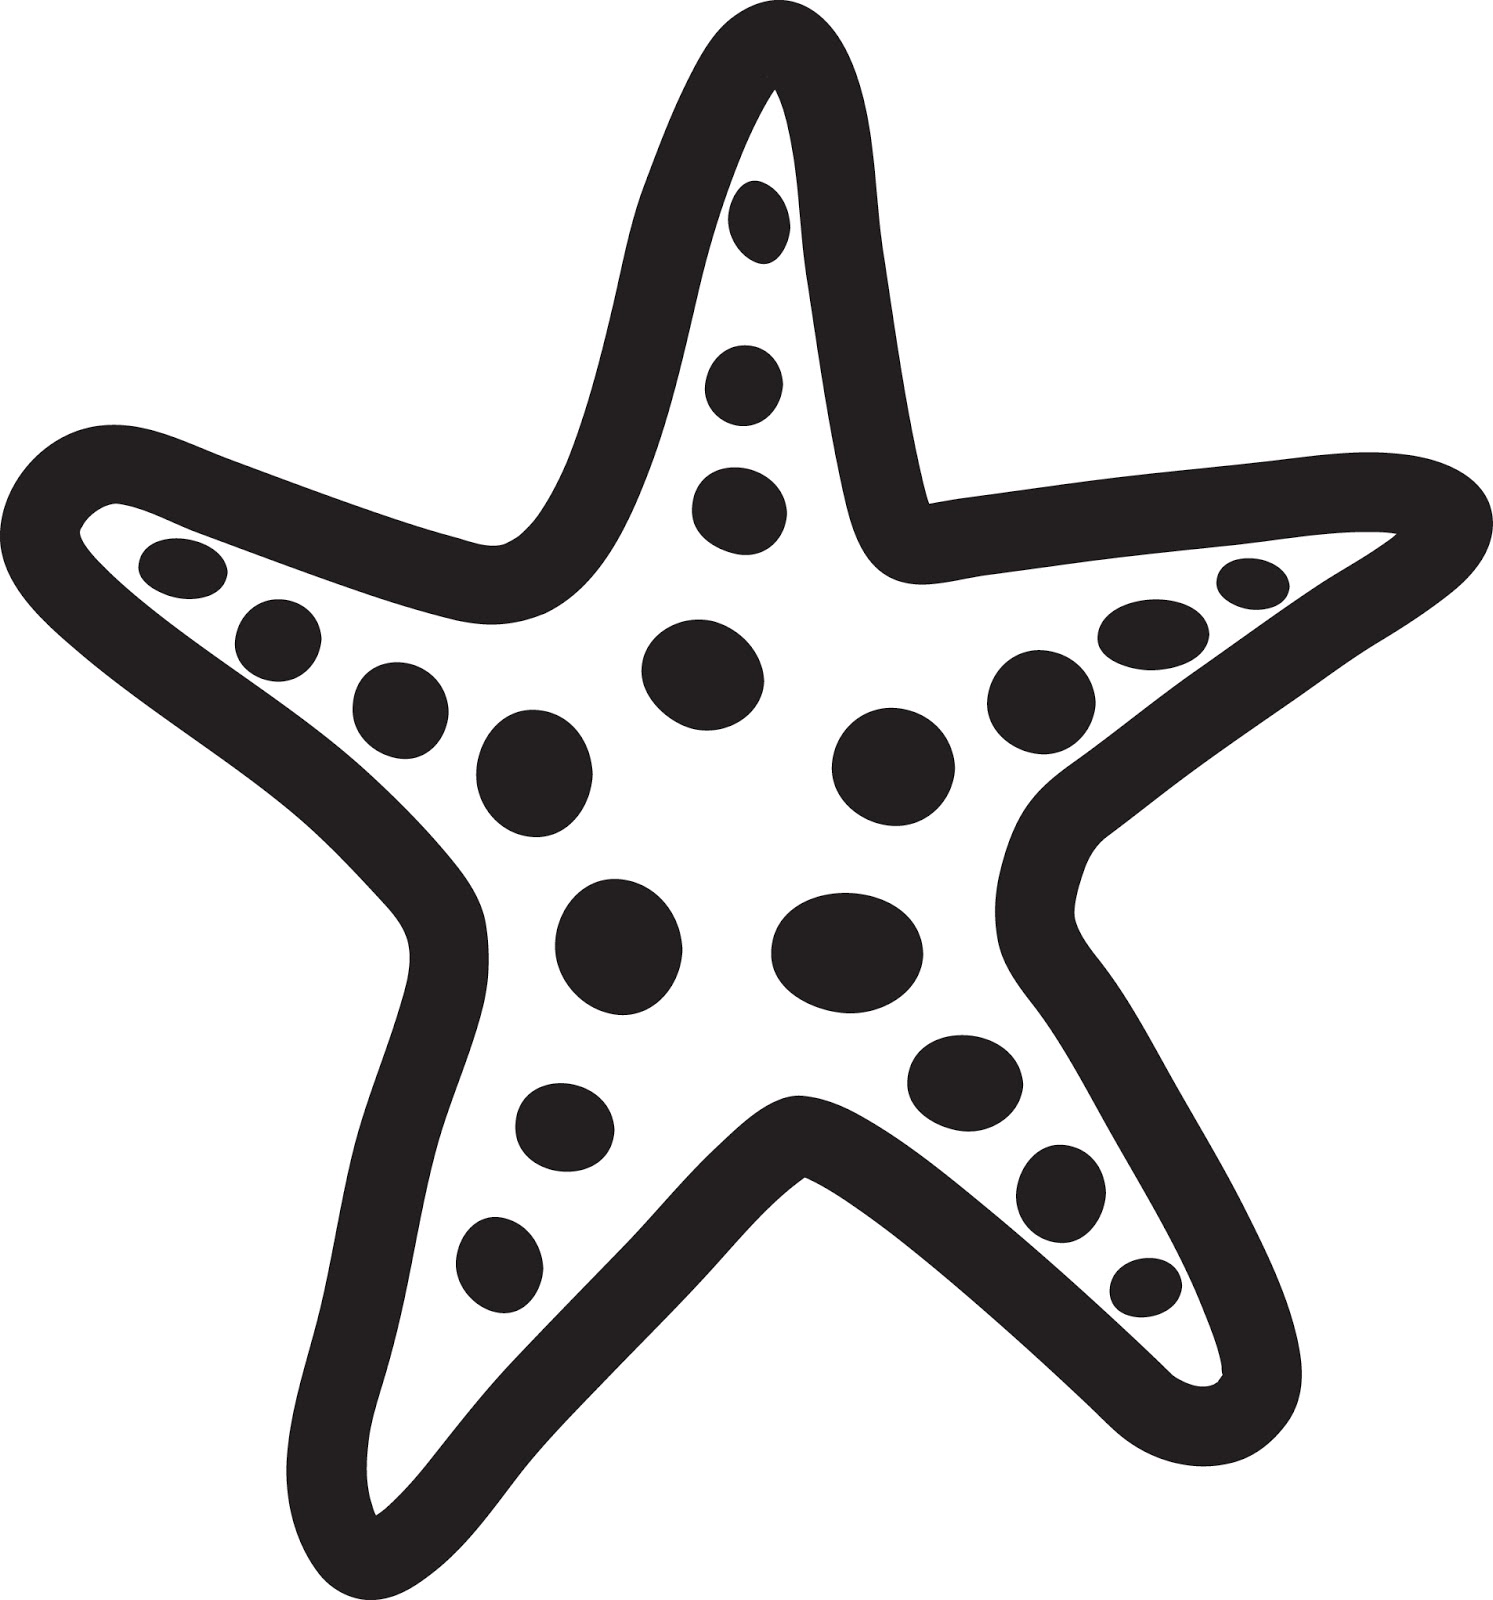 Starfish clipart #17, Download drawings